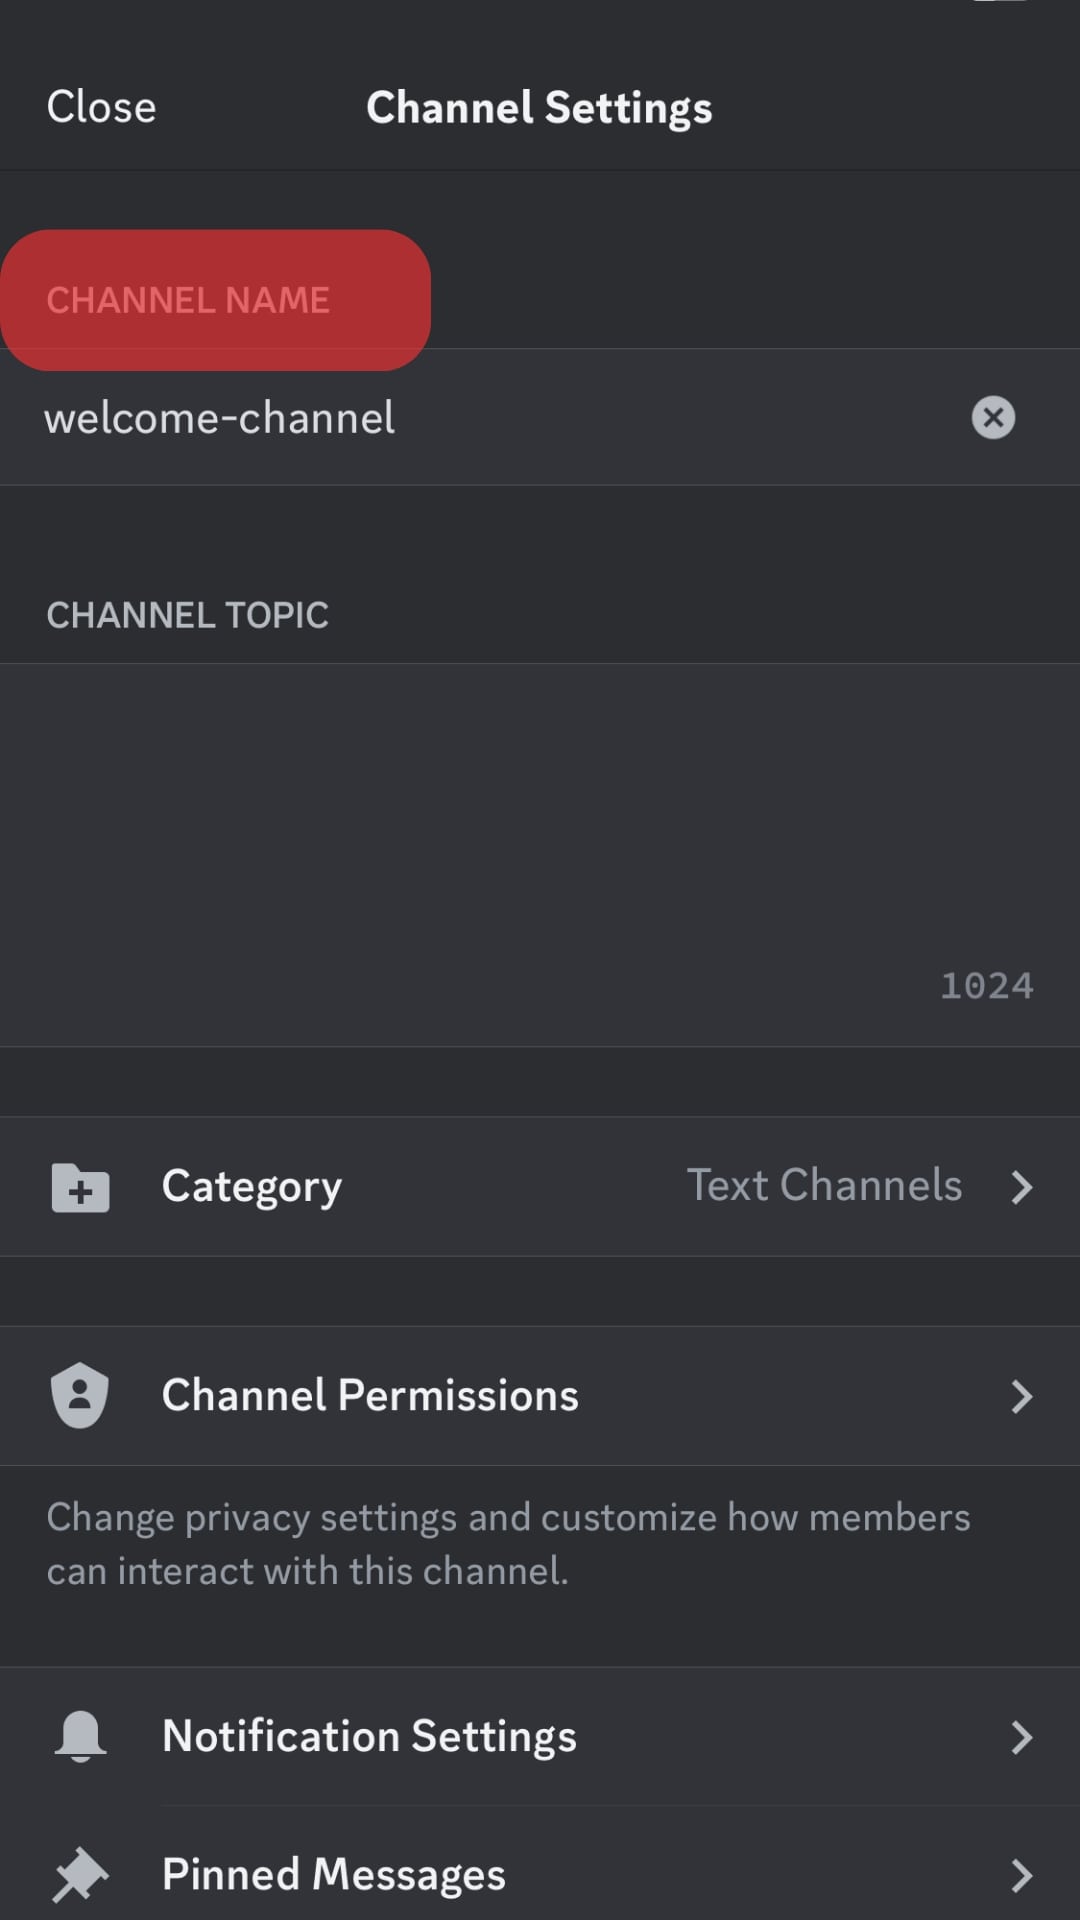 Tap On The Space Provided For Channel Name.